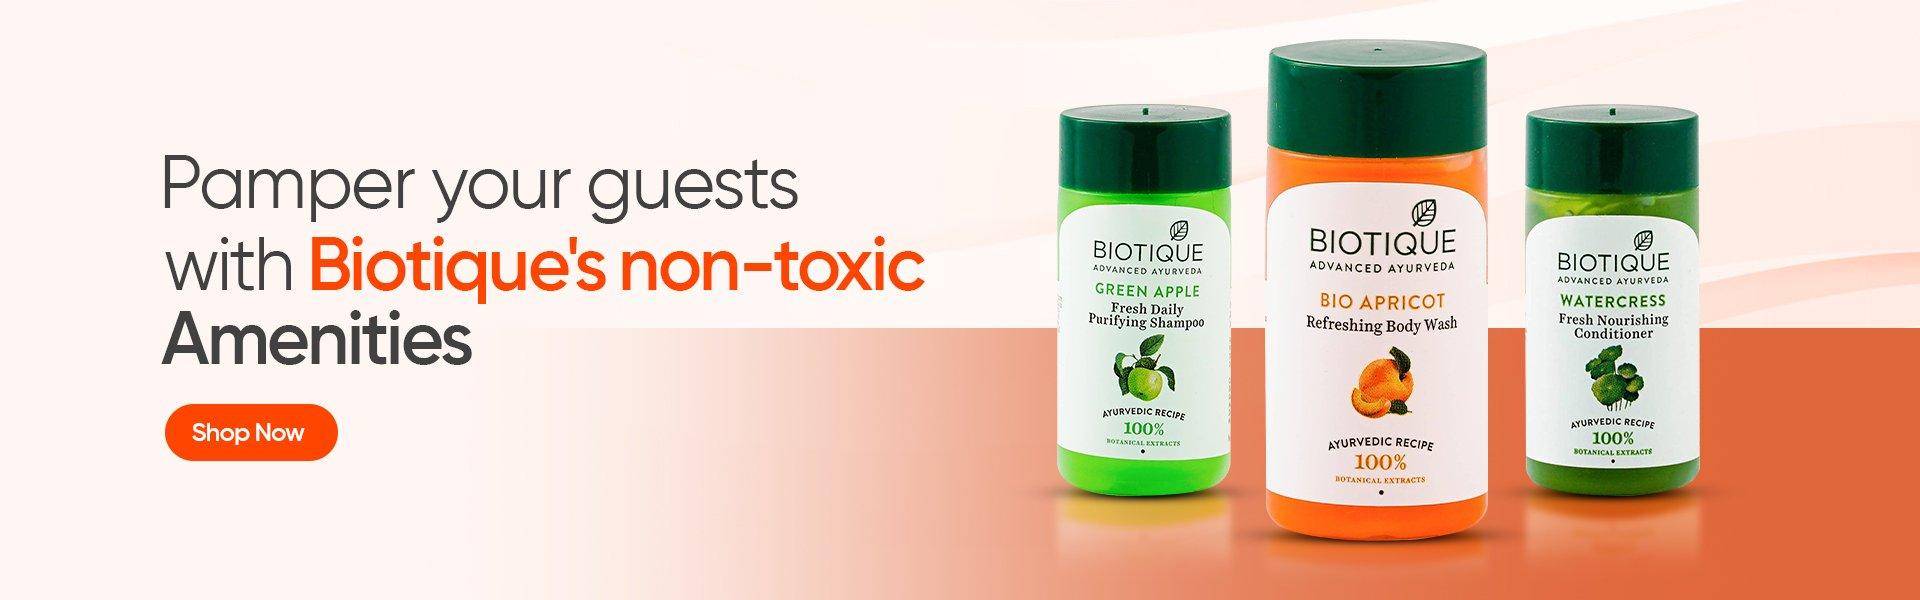 Biotique all-natural, non-toxic hotel amenities for guests